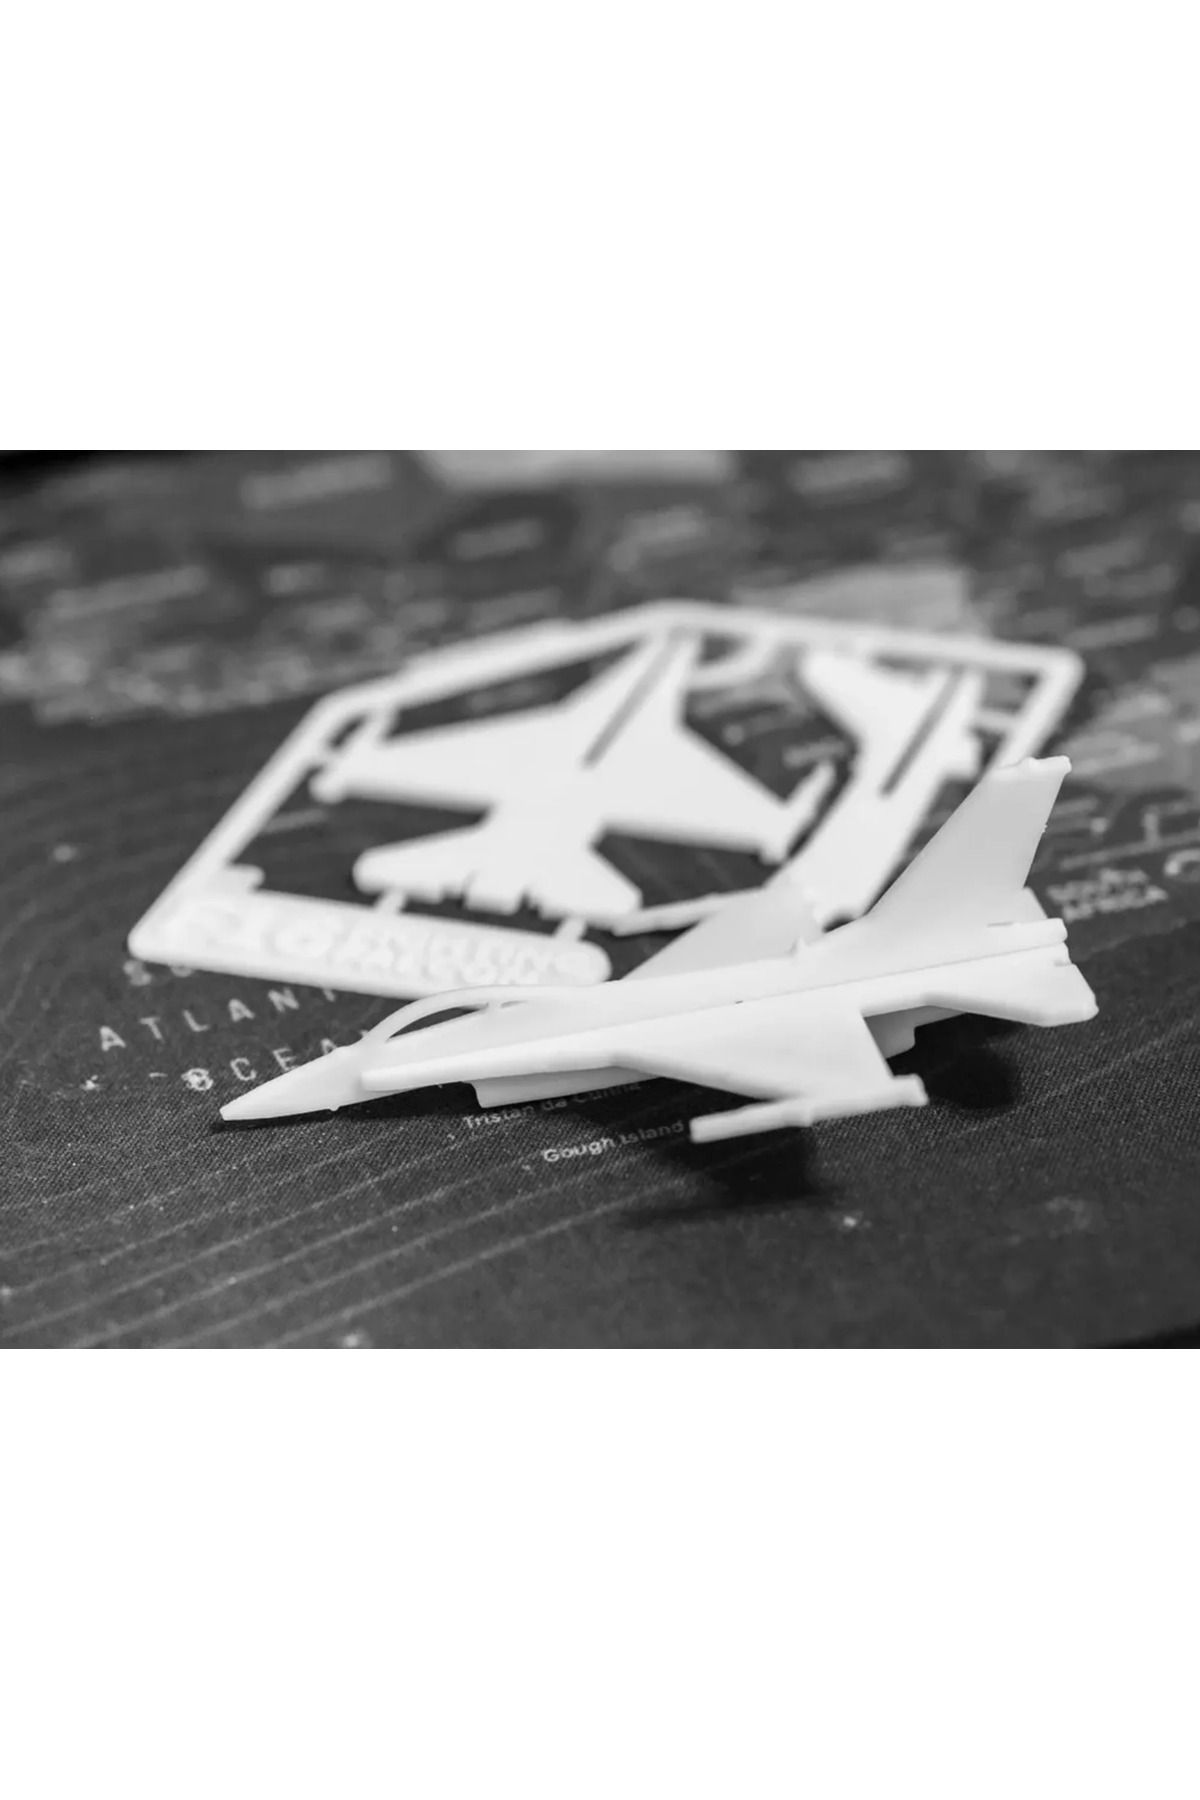 buxeco F-16 Kit Card Demonte 1 Adet